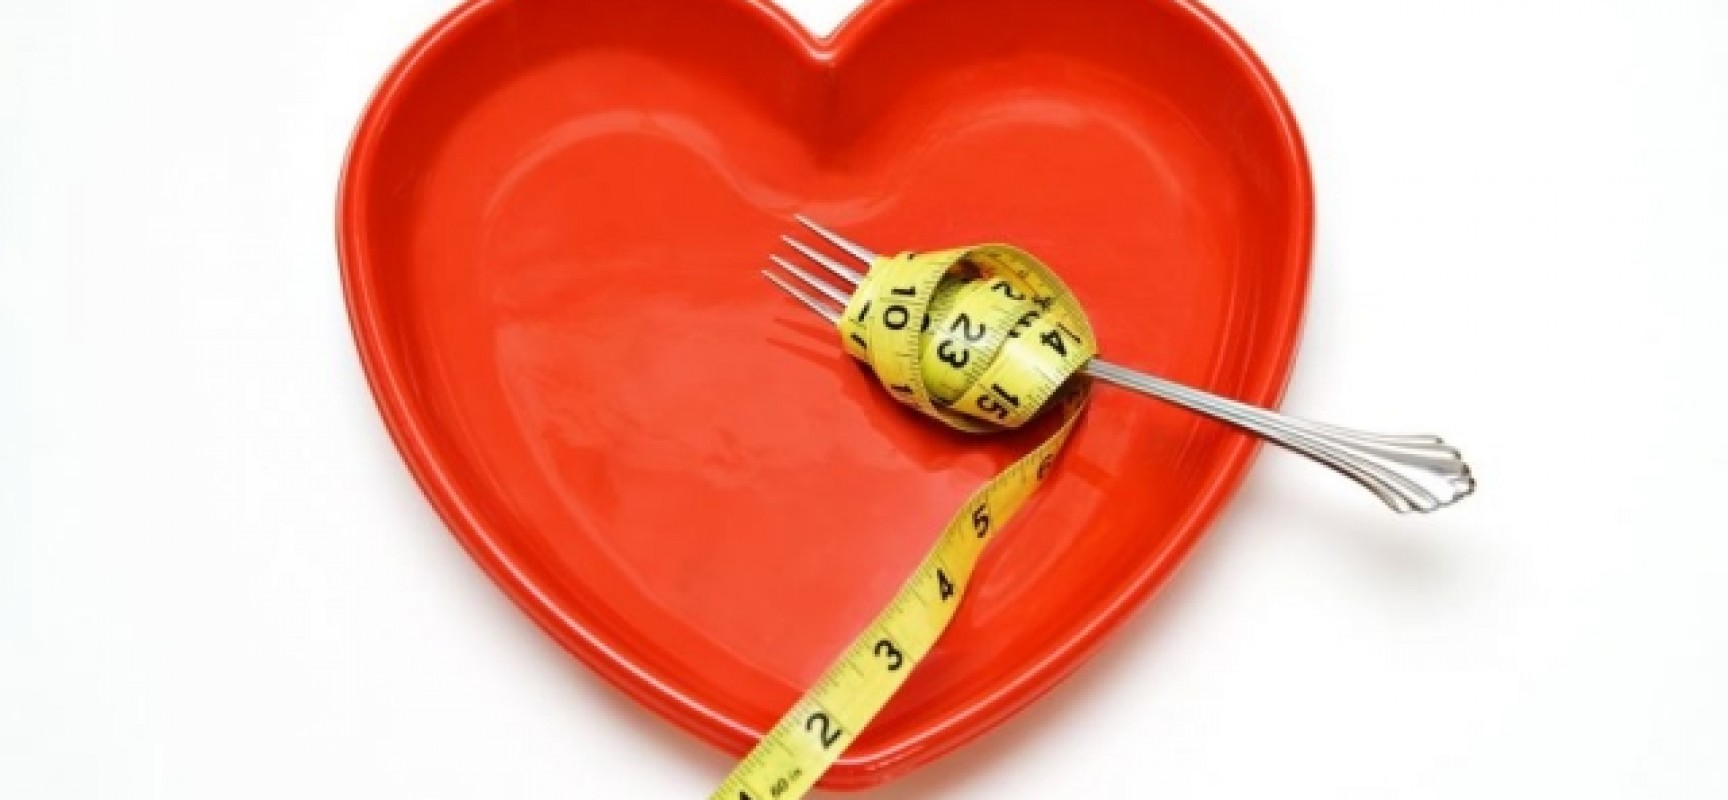 The So Called Heart Healthy Food Which Can Actually Clog Your Arteries!